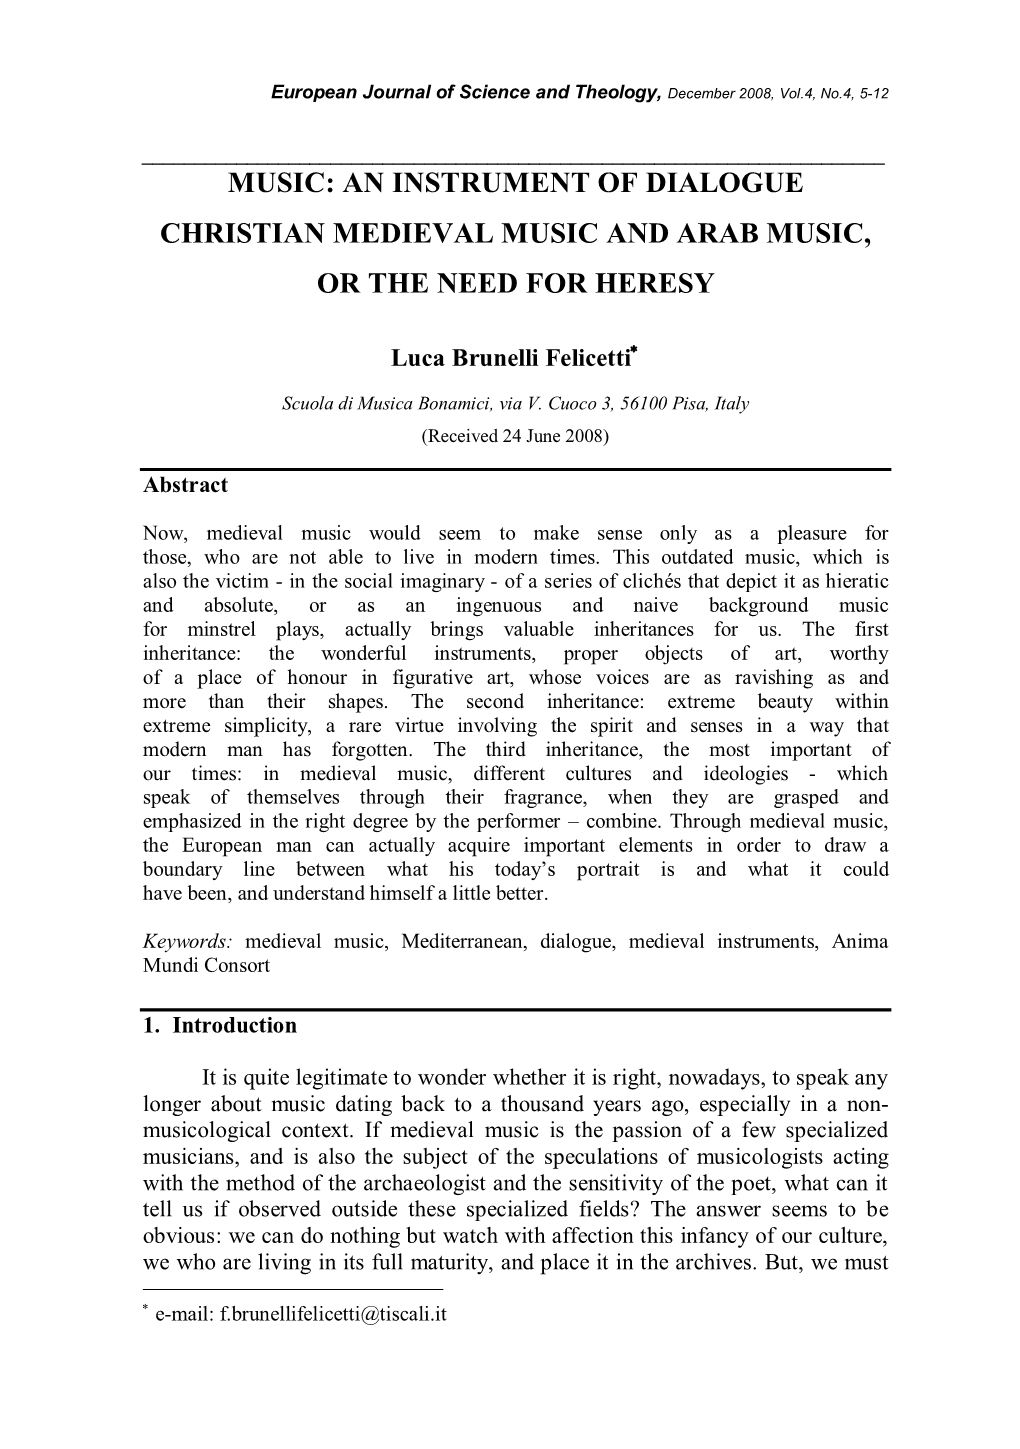 Music: an Instrument of Dialogue Christian Medieval Music and Arab Music, Or the Need for Heresy